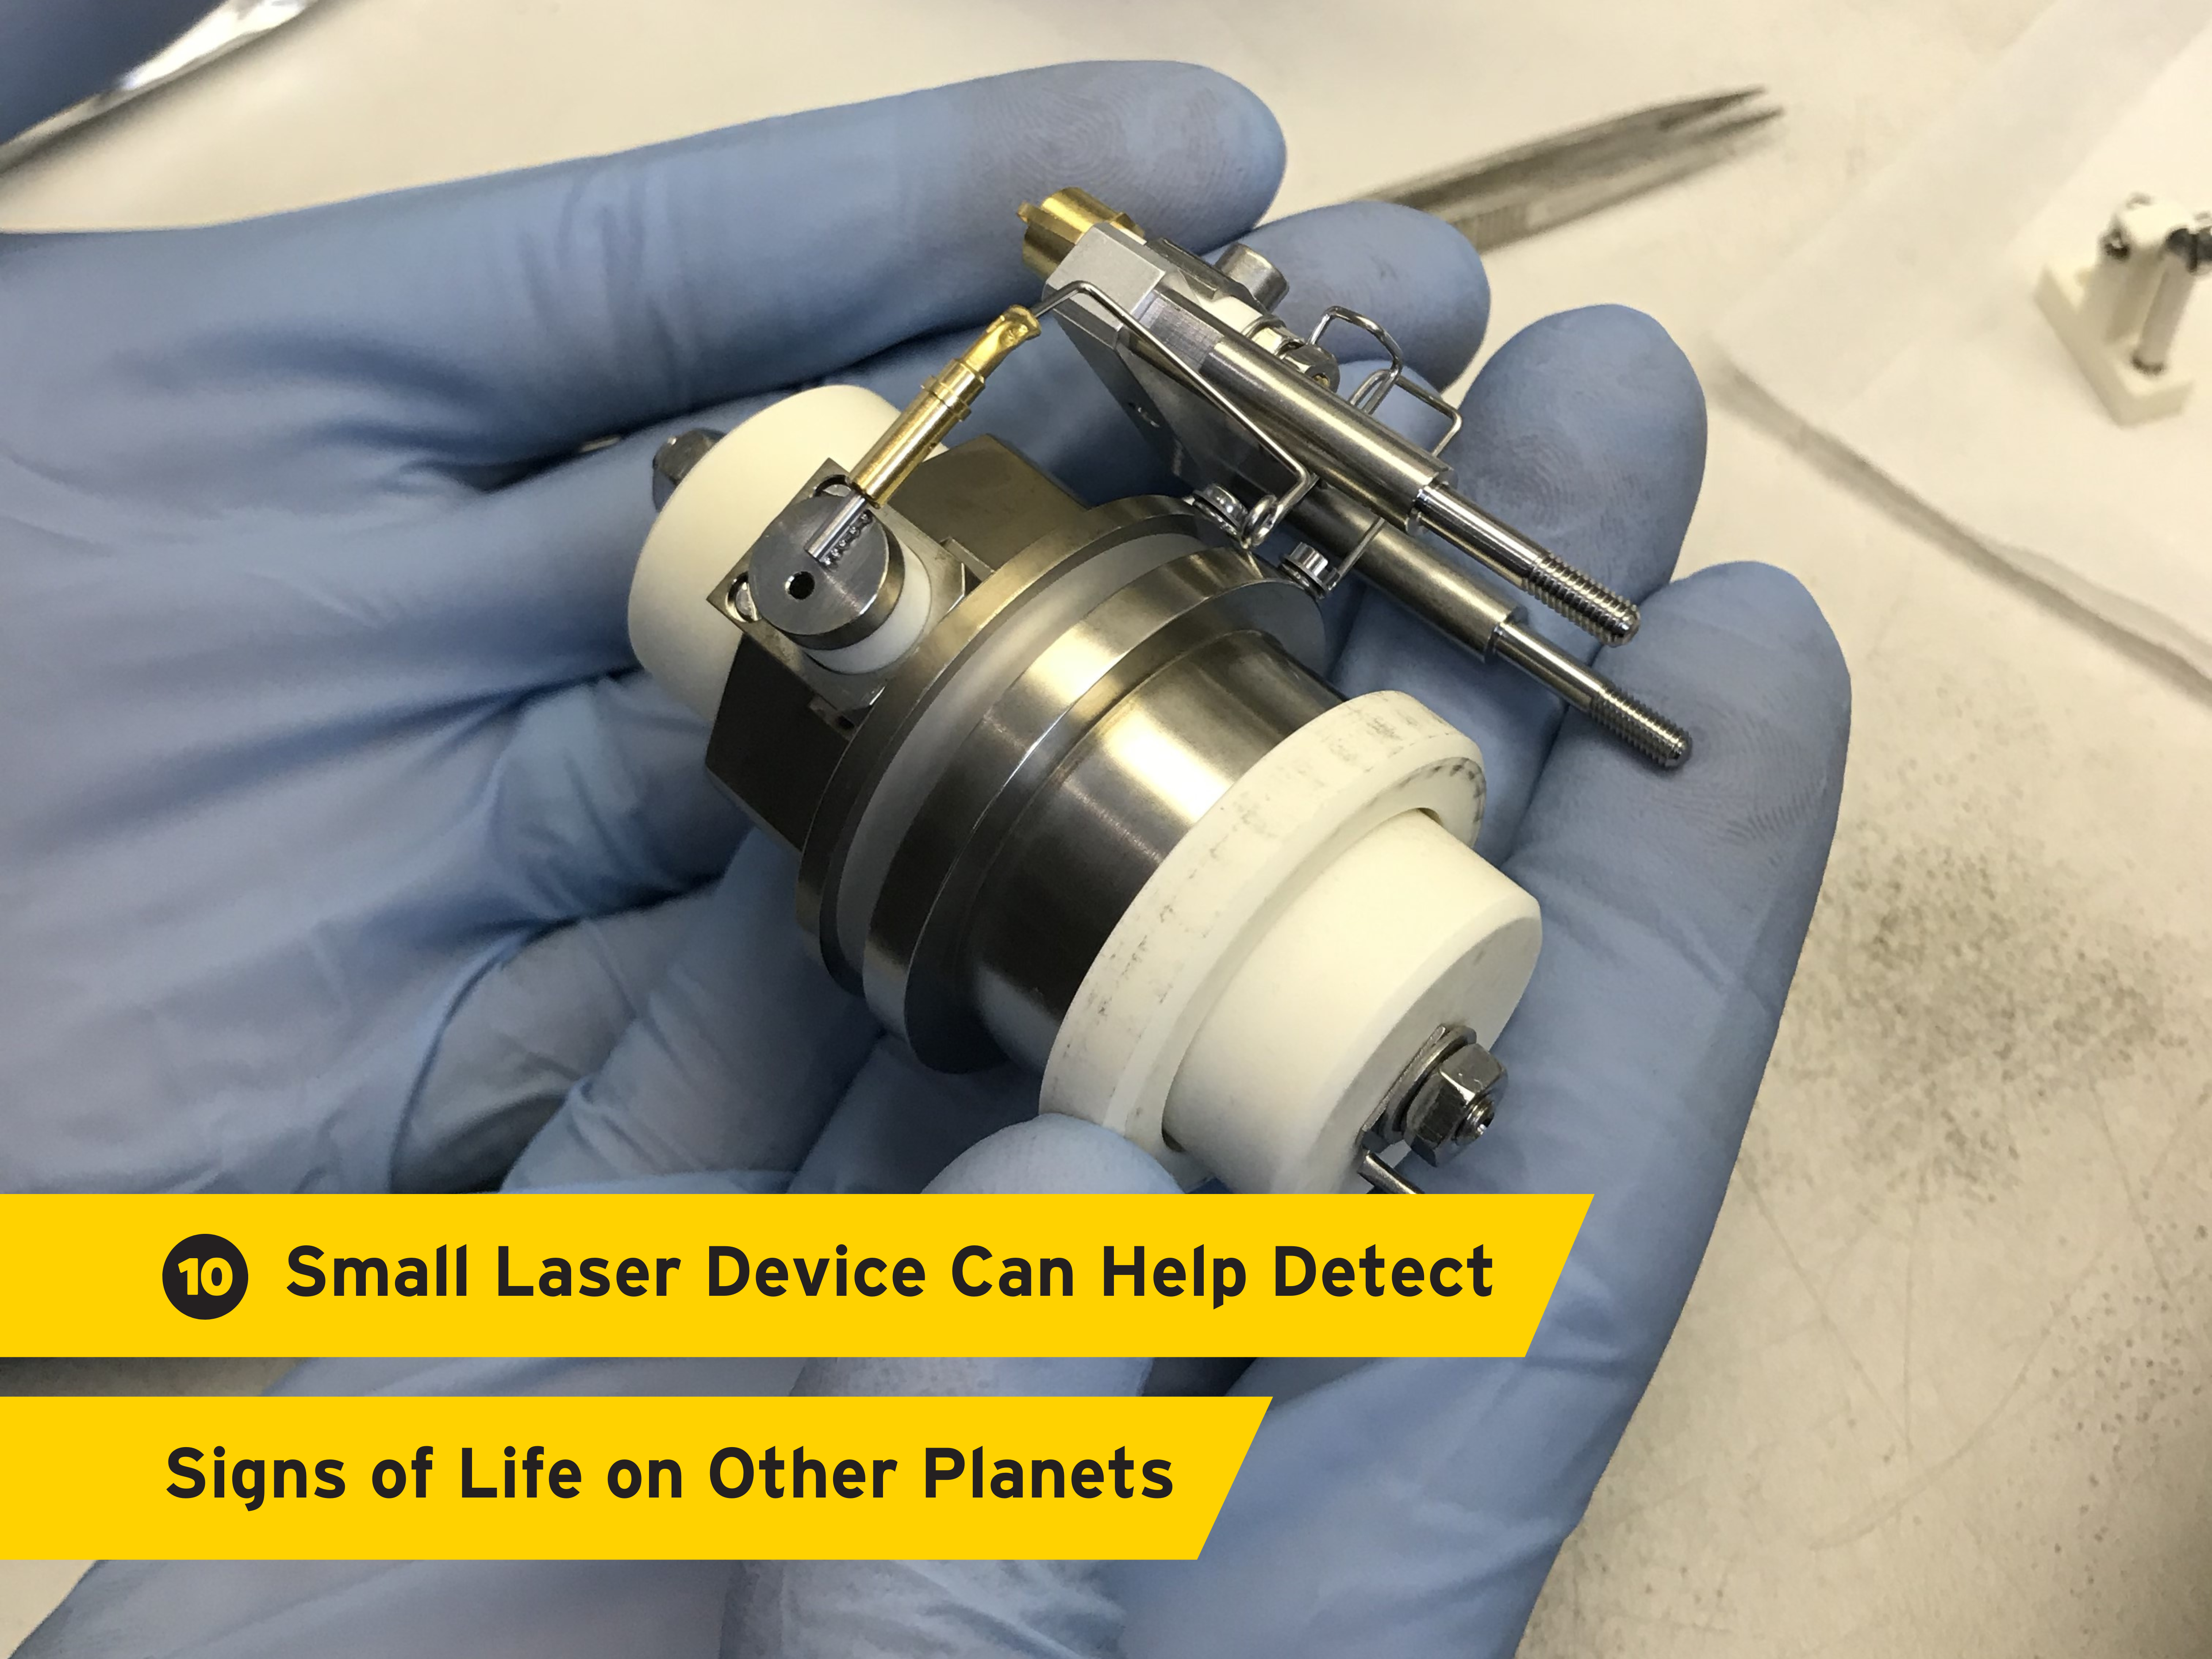 "New Small Laser Device Can Help Detect Signs of Life on Other Planets" over a background showing the laser device held in gloved hands